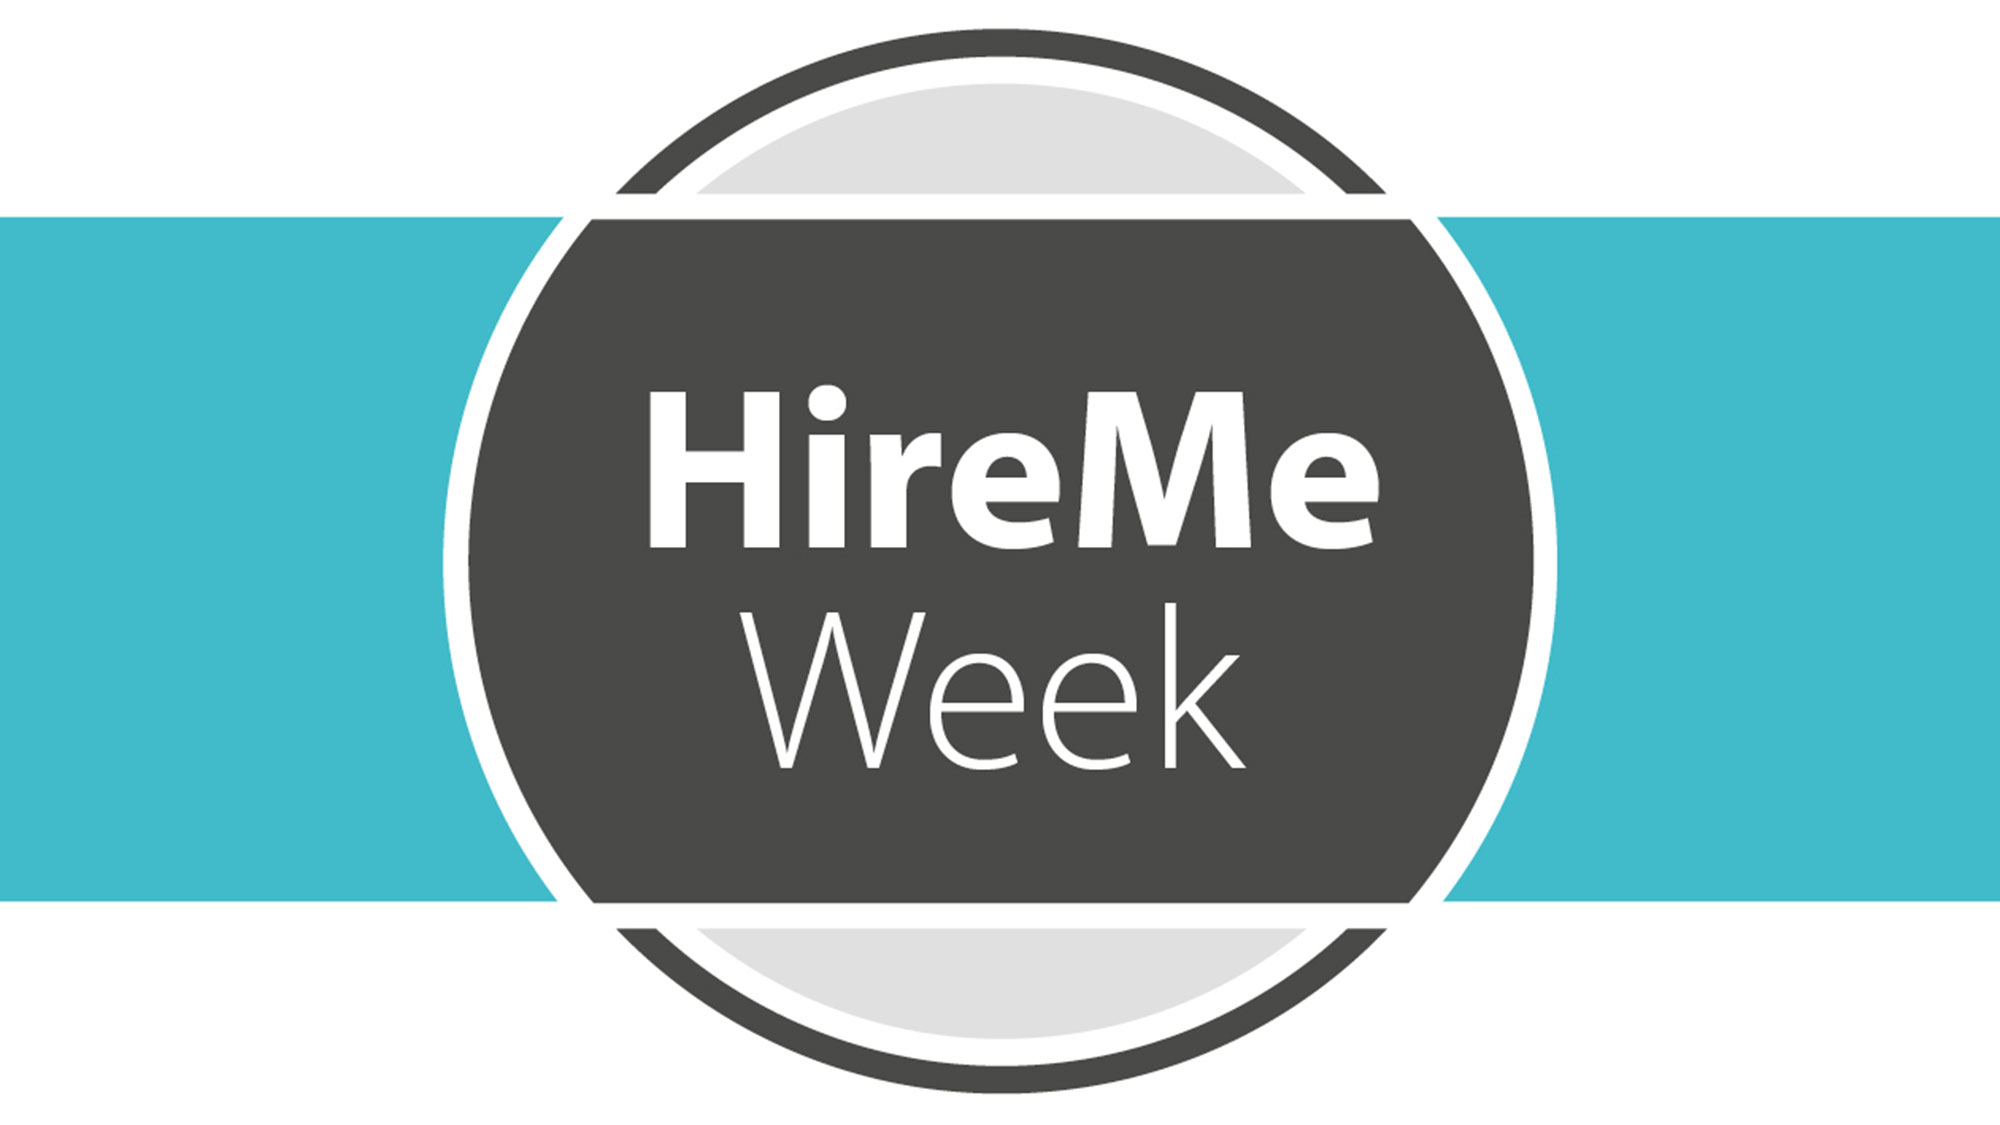 HireMe Week: How to Manage your Career Successfully in a Forever Changing Labour Market